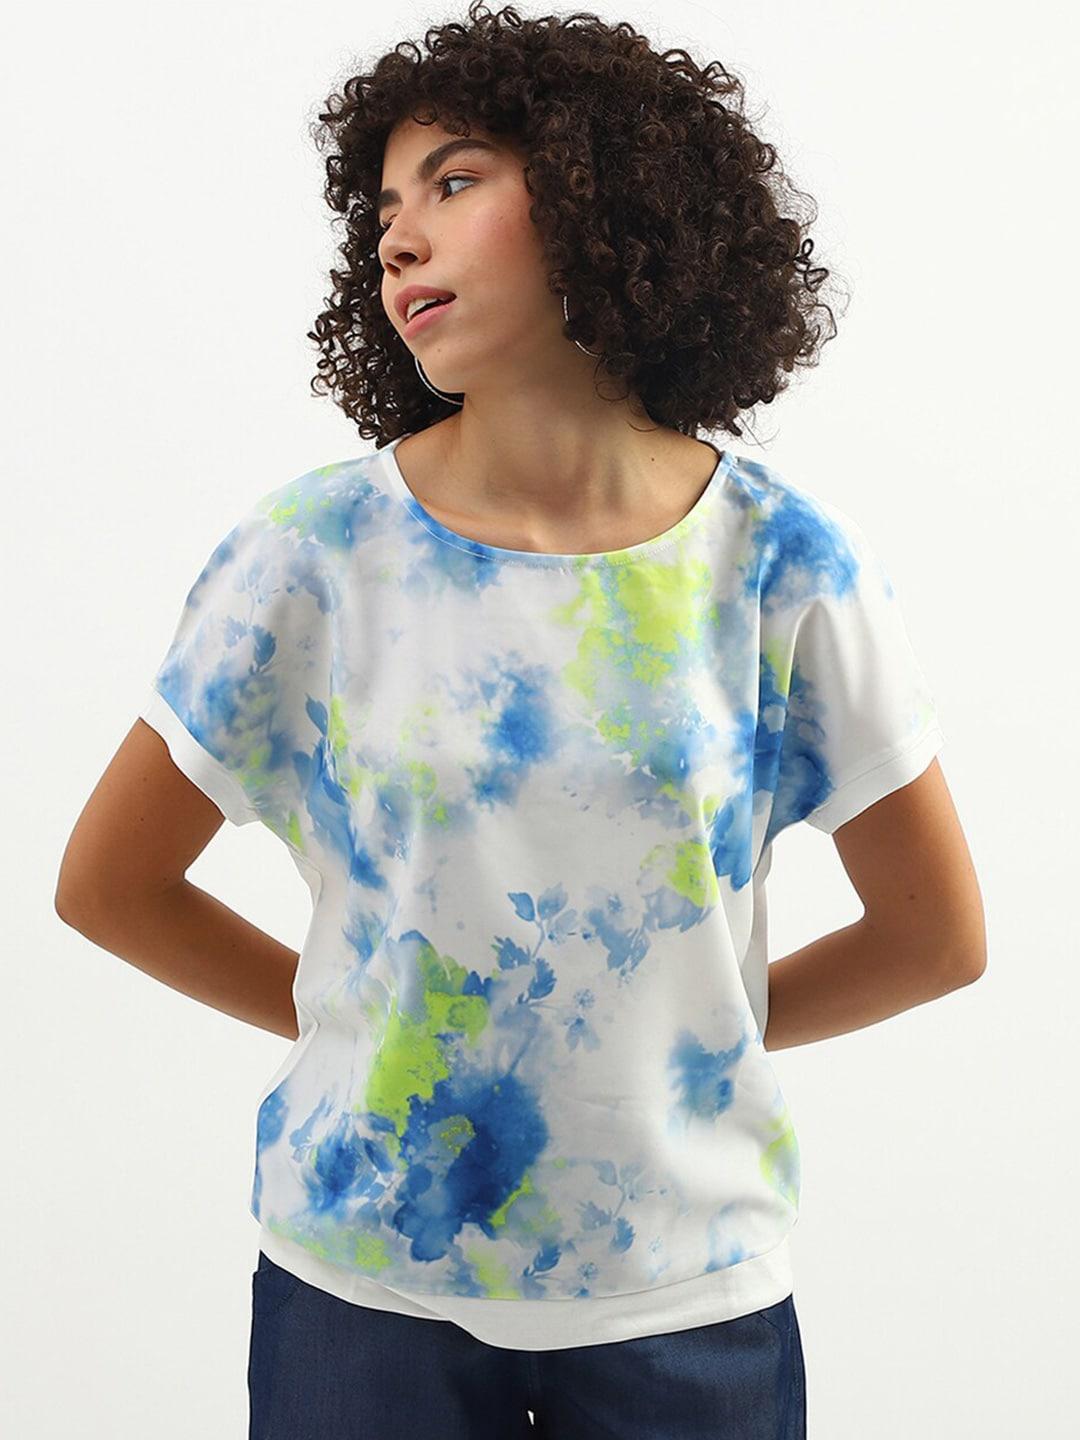 United Colors of Benetton Multicoloured Tie and Dye Print Top